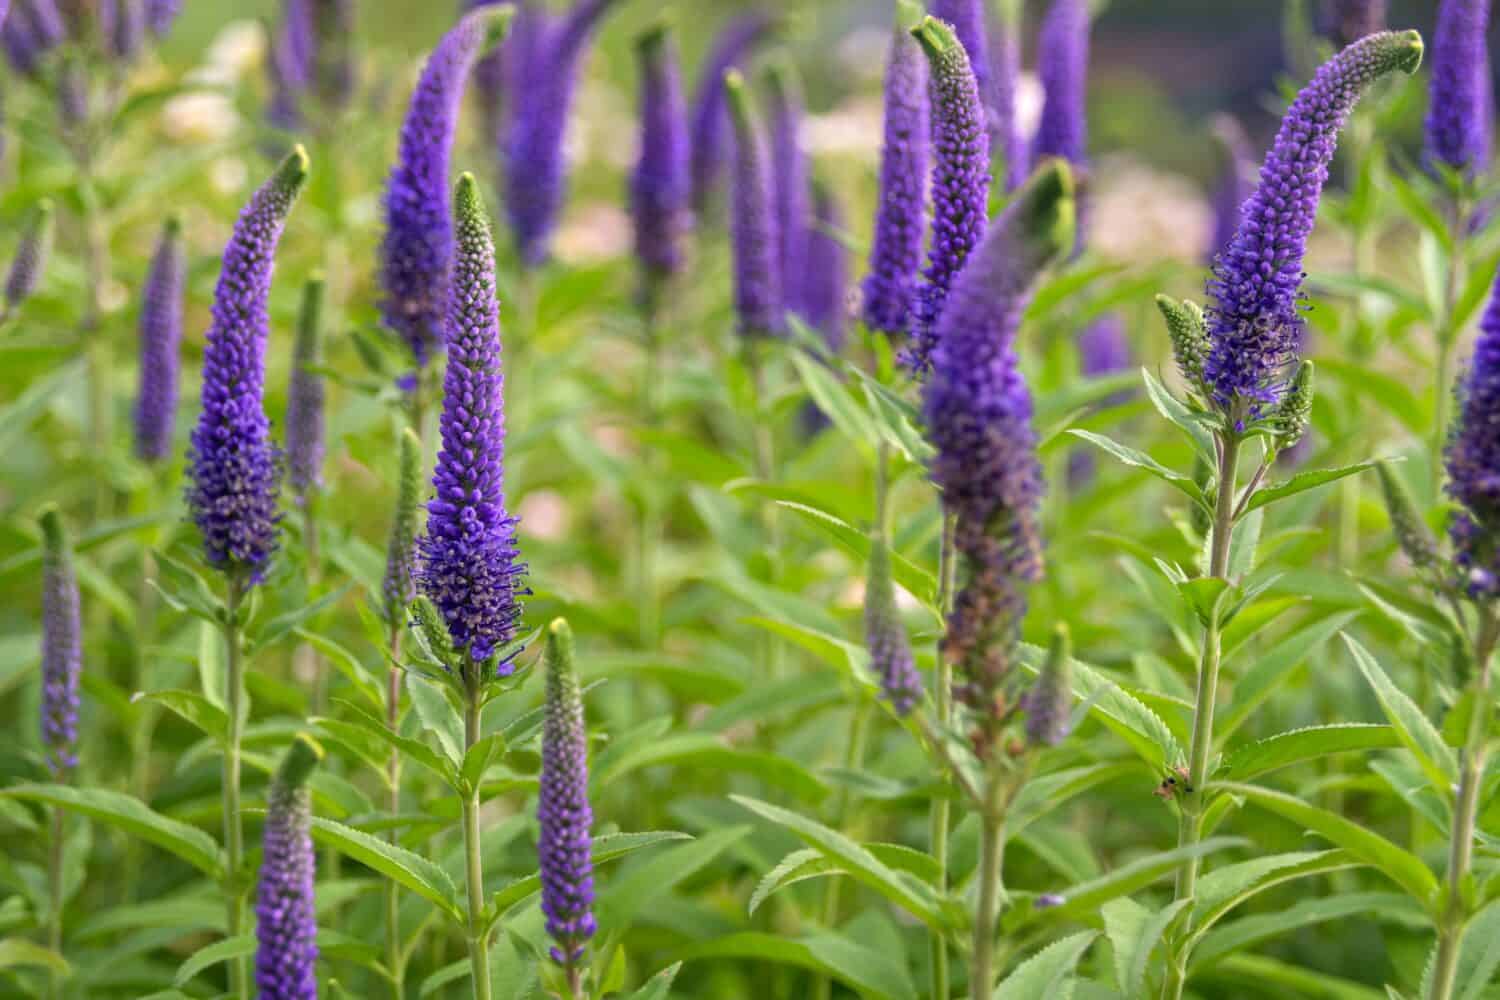 Long blue flowers Veronica spicata in a flower bed. Perennial herbaceous ornamental plant. Gardening and landscape design.